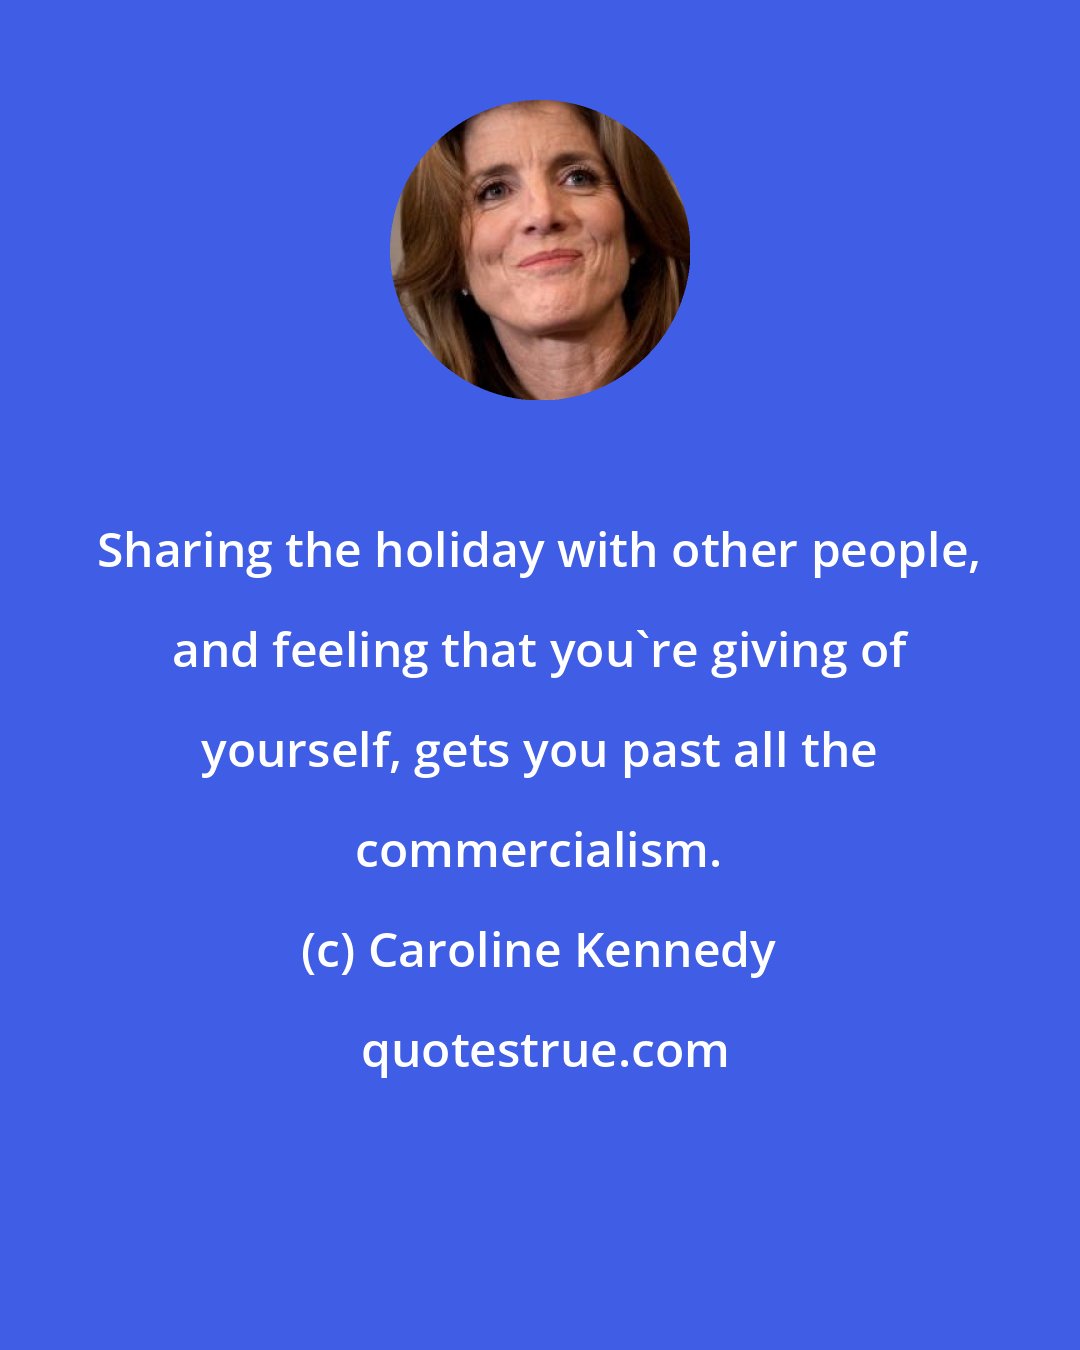 Caroline Kennedy: Sharing the holiday with other people, and feeling that you're giving of yourself, gets you past all the commercialism.